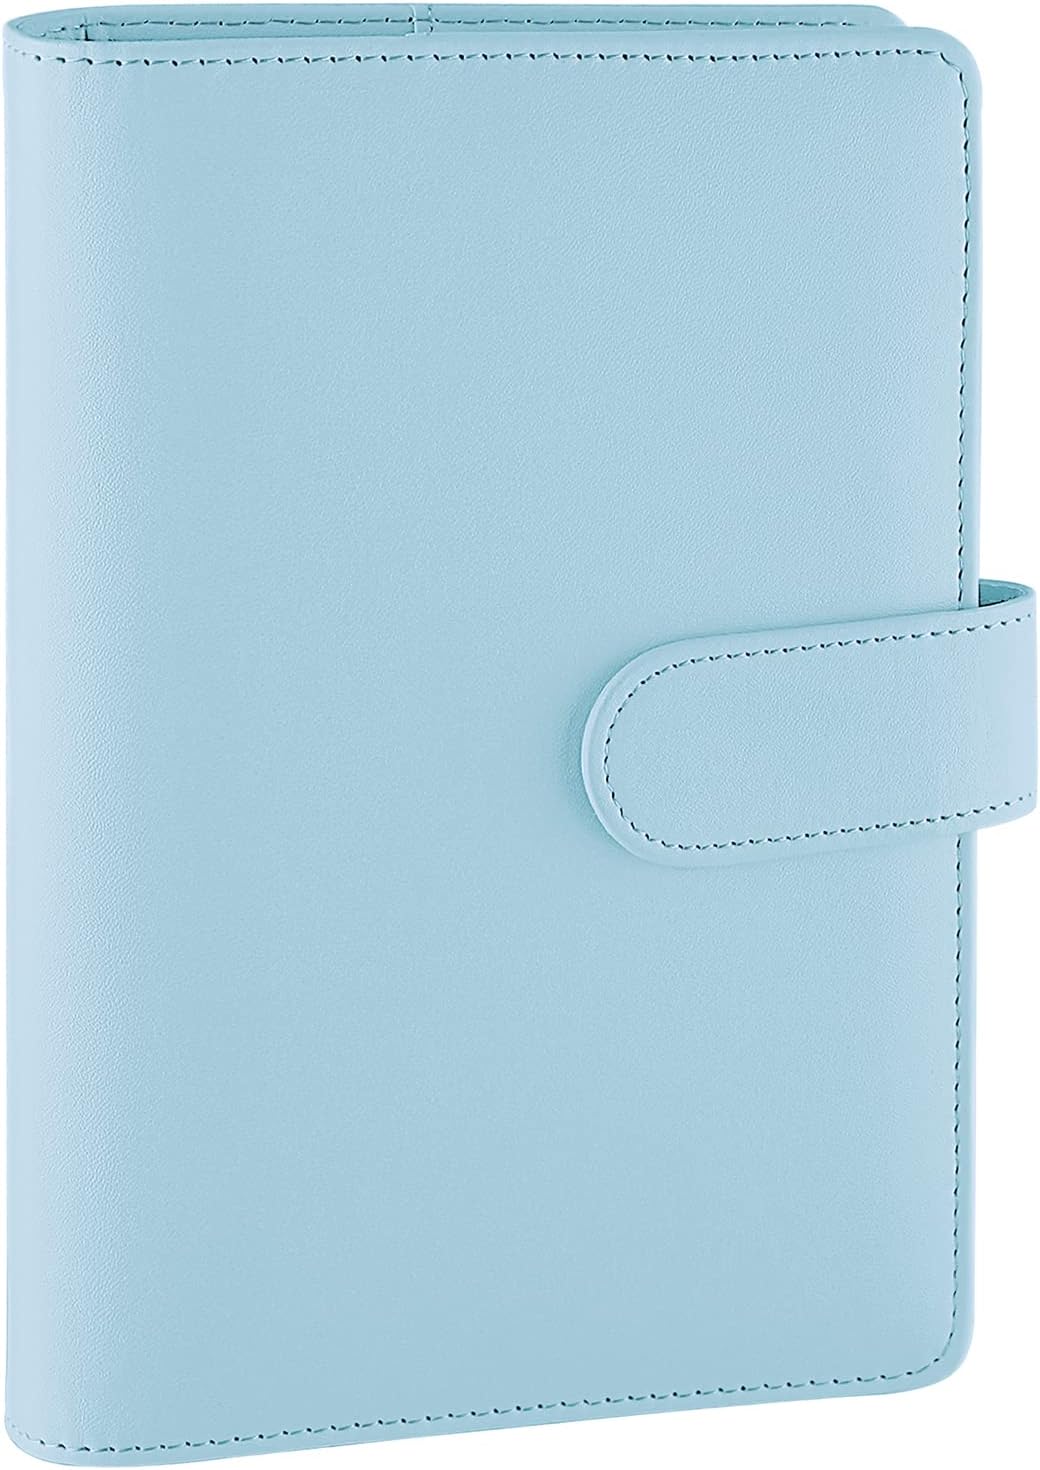 Antner A6 PU Leather Notebook Binder Refillable 6 Ring [...]